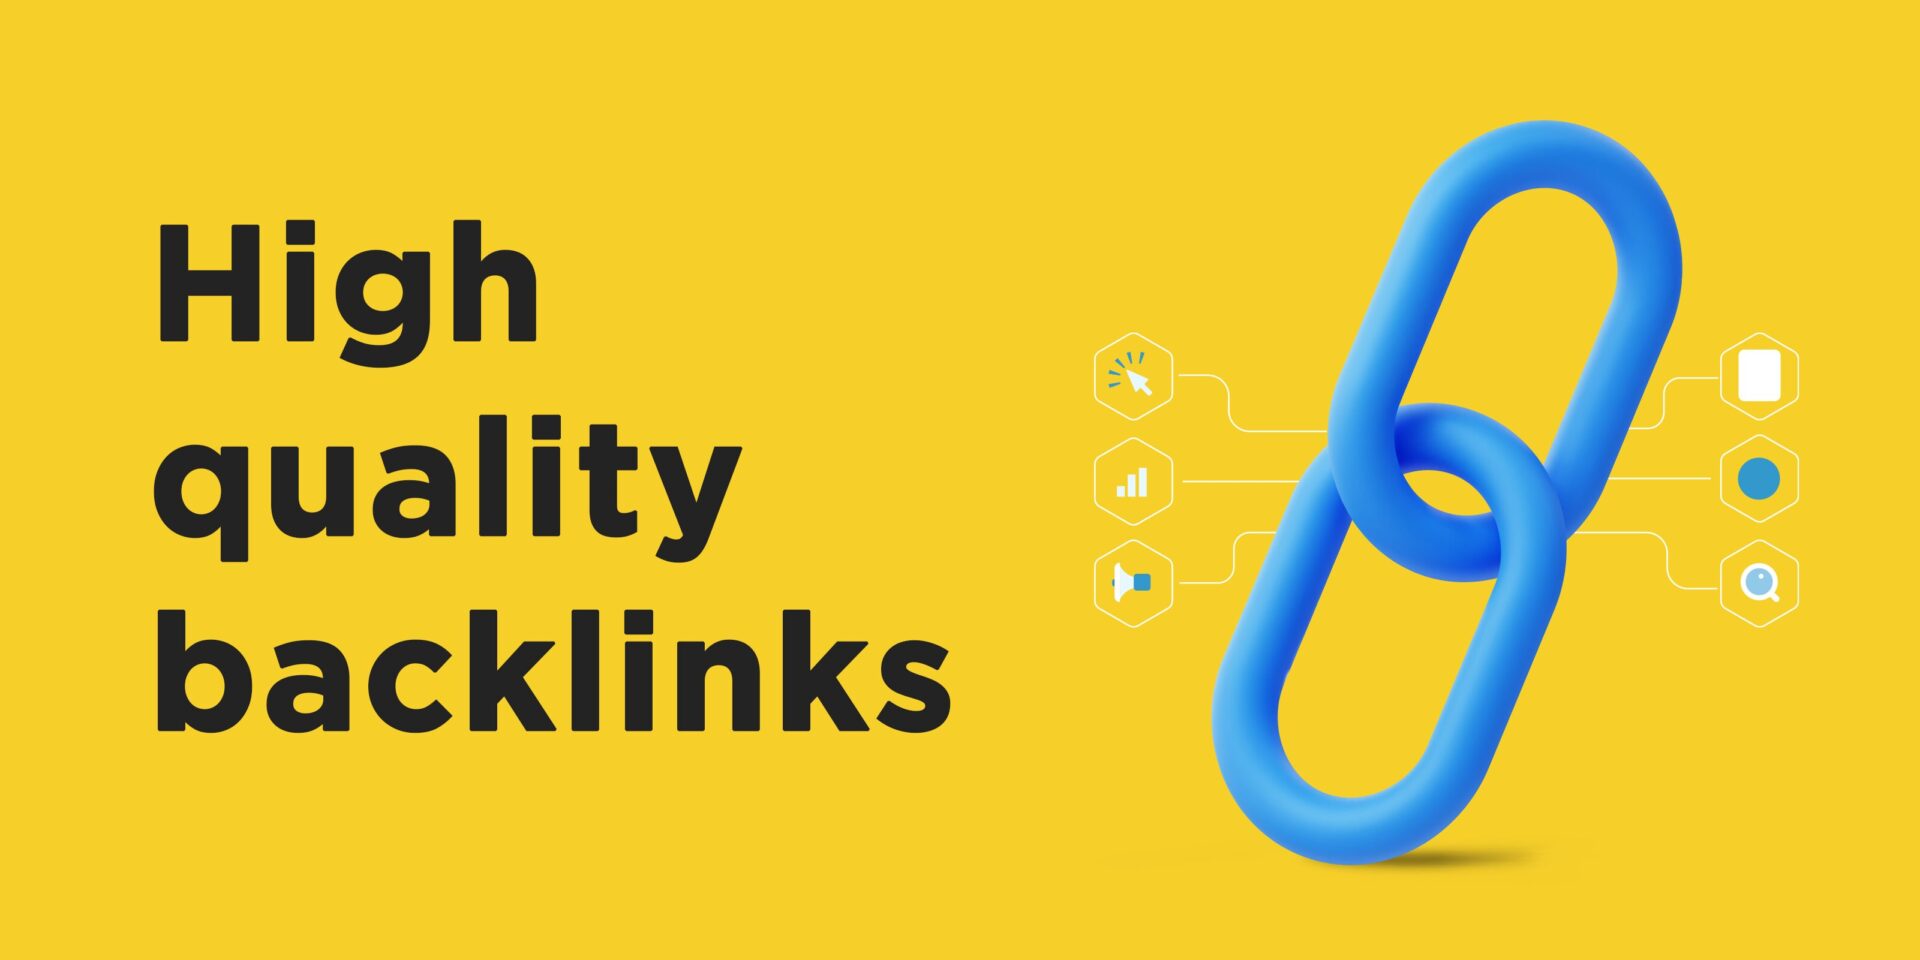 What is quality backlinks?